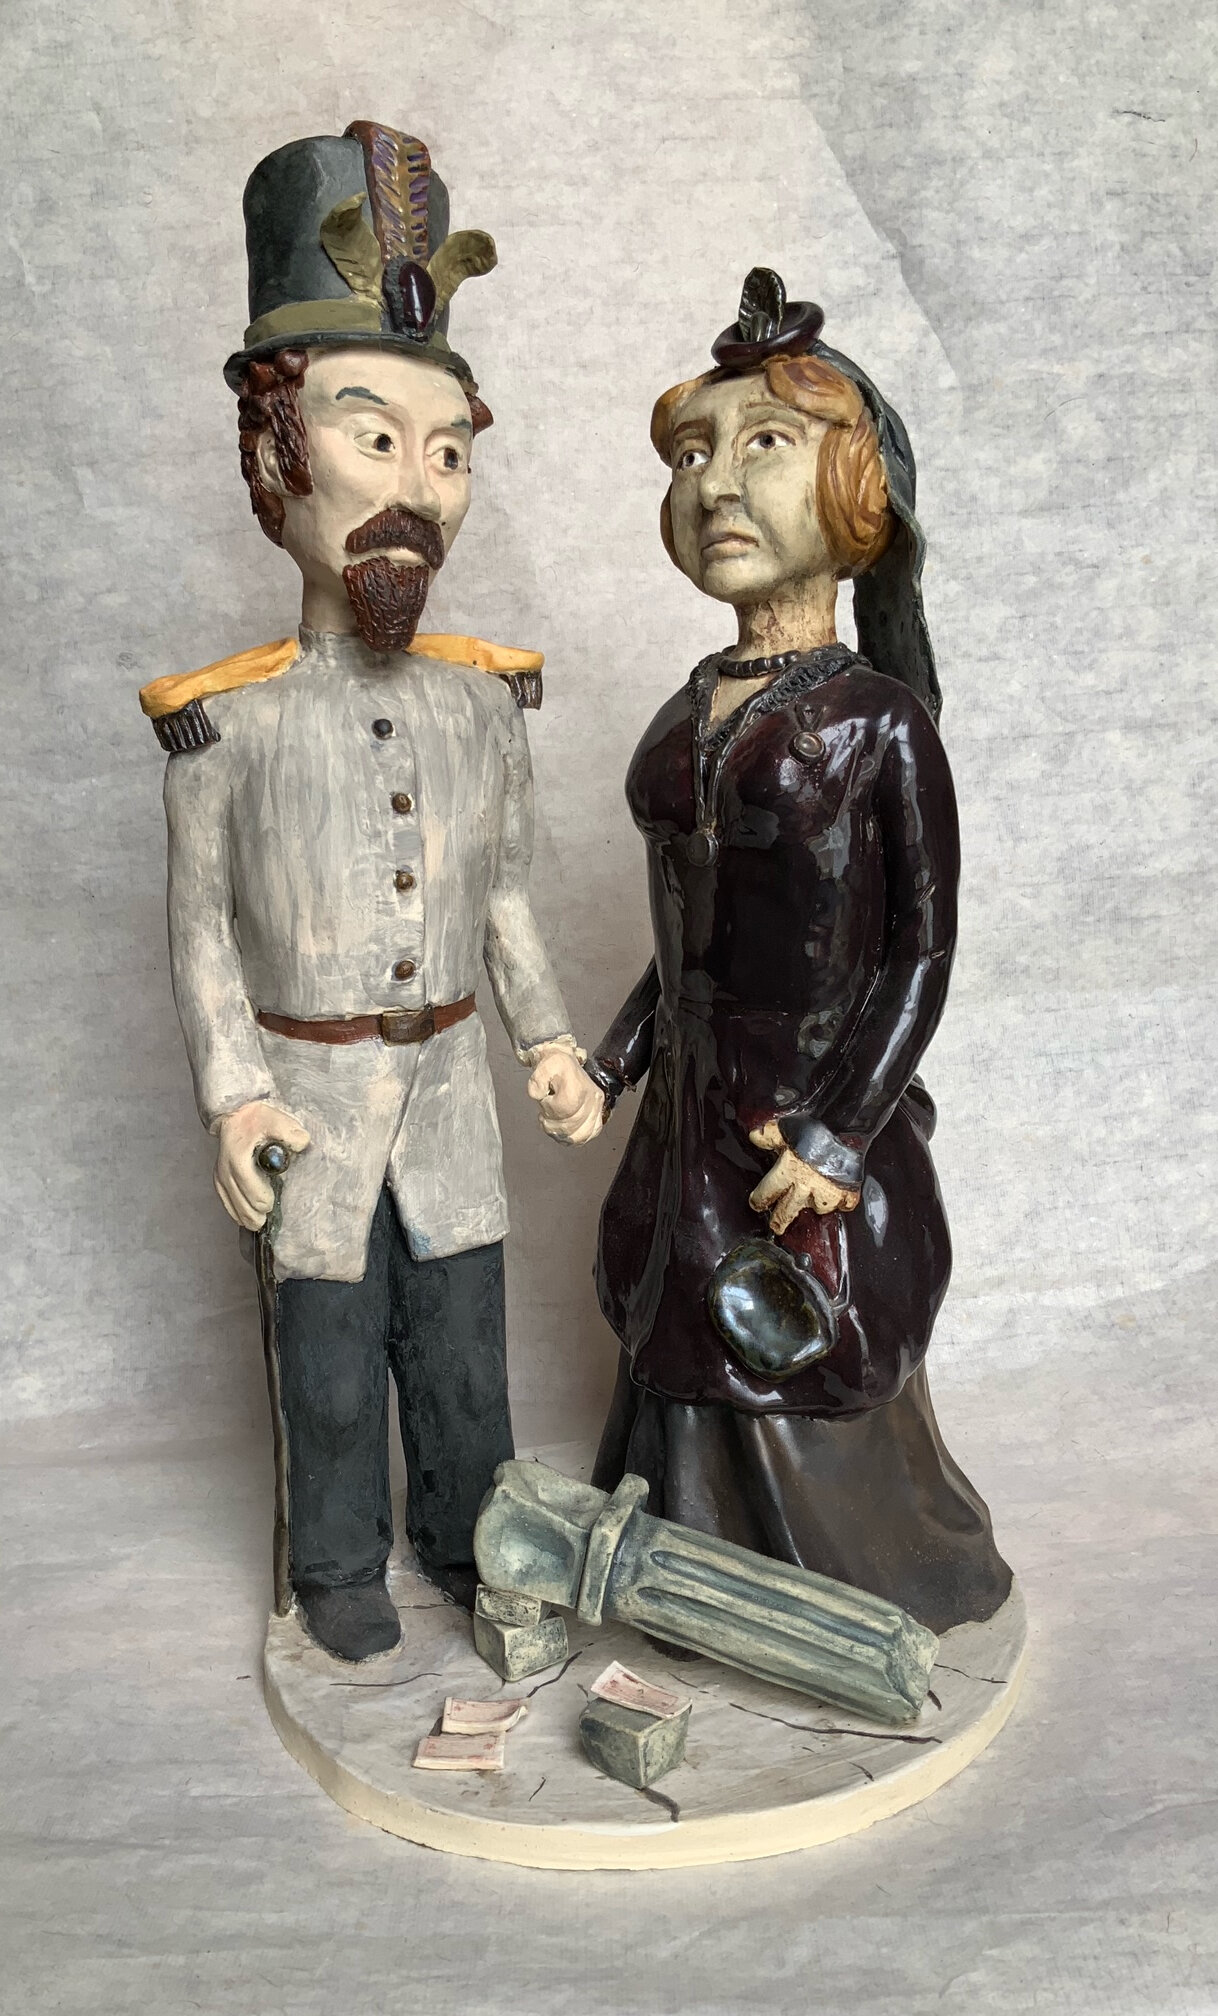    Royal Wedding , 2017, by Kaytea Petro (b. 1978).  High fire stoneware with underglaze and decals. This piece imagining the union of Emperor Norton and “the Empress Dowager Norton” (José Sarria) is part of Petro’s   Sanctuary City  series . Detail 